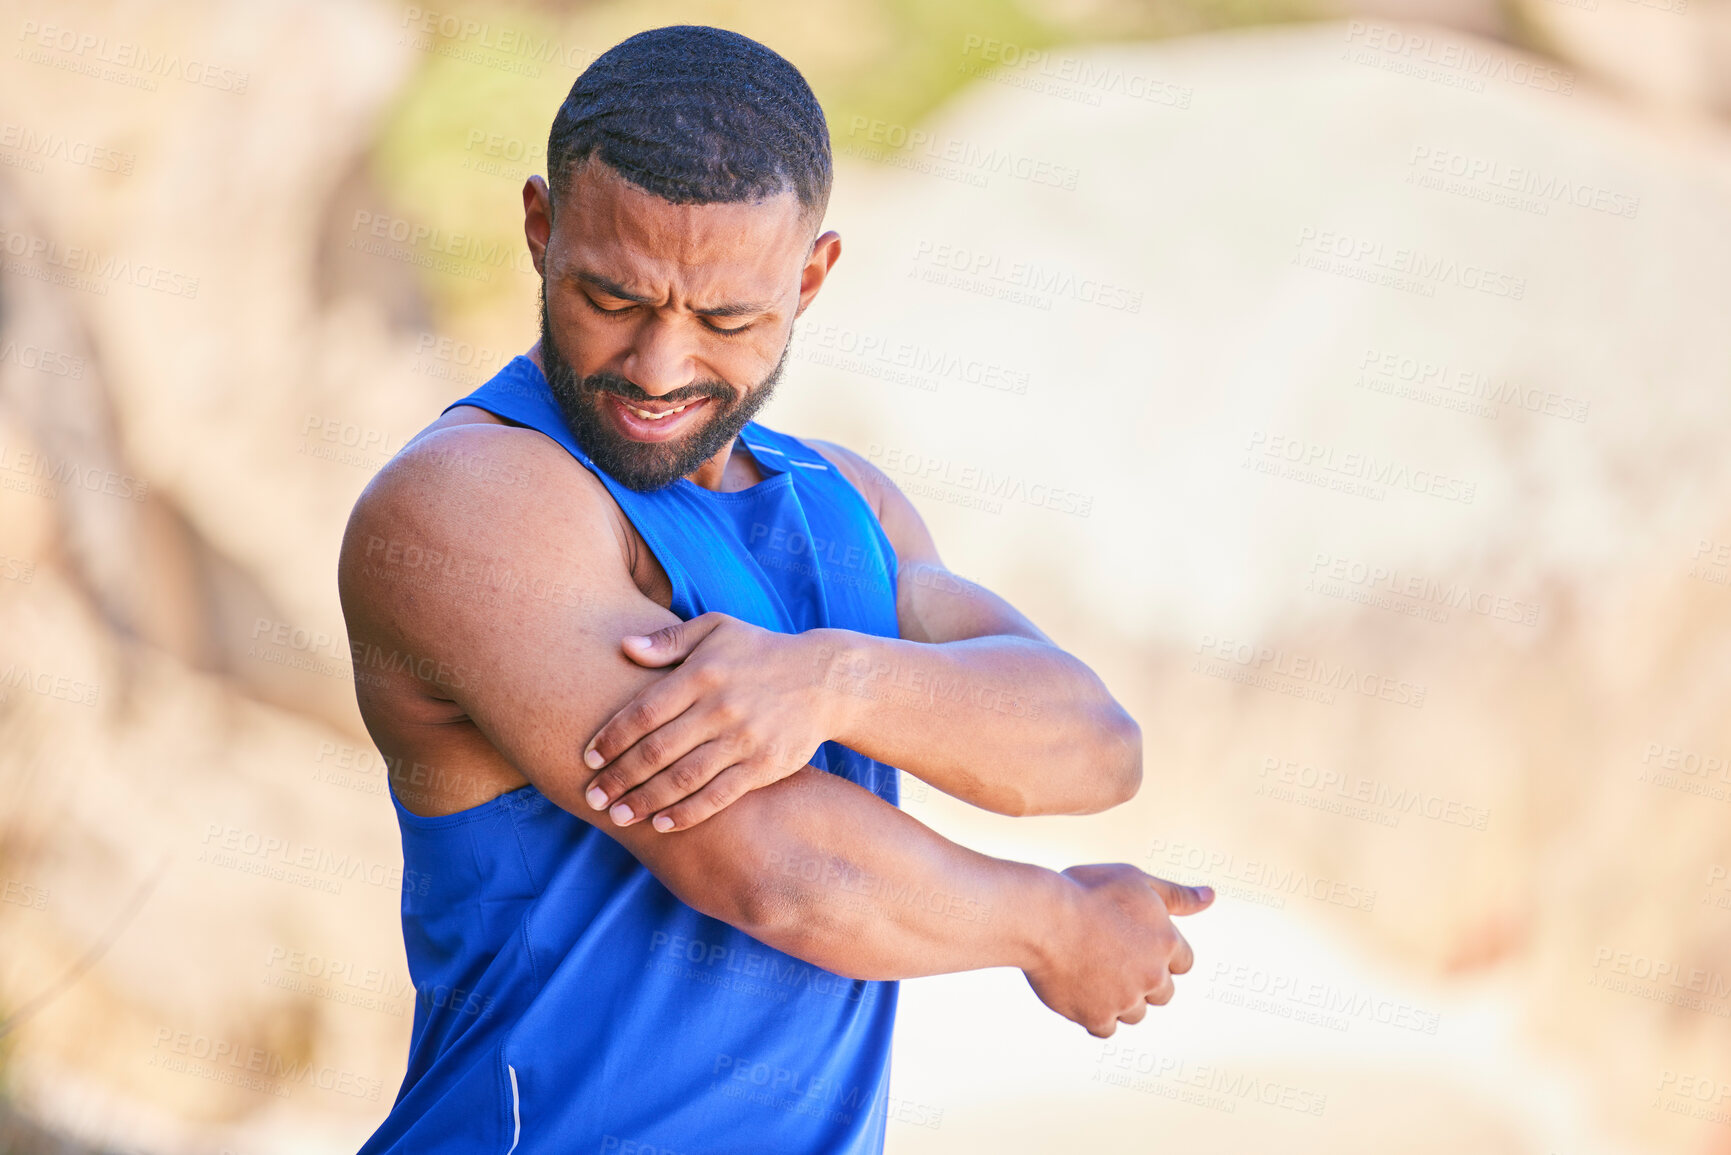 Buy stock photo Arm pain, sport and man outdoor, accident and fitness exercise in training workout. Body injury, shoulder or arthritis of athlete, muscle problem or fibromyalgia in medical emergency for osteoporosis